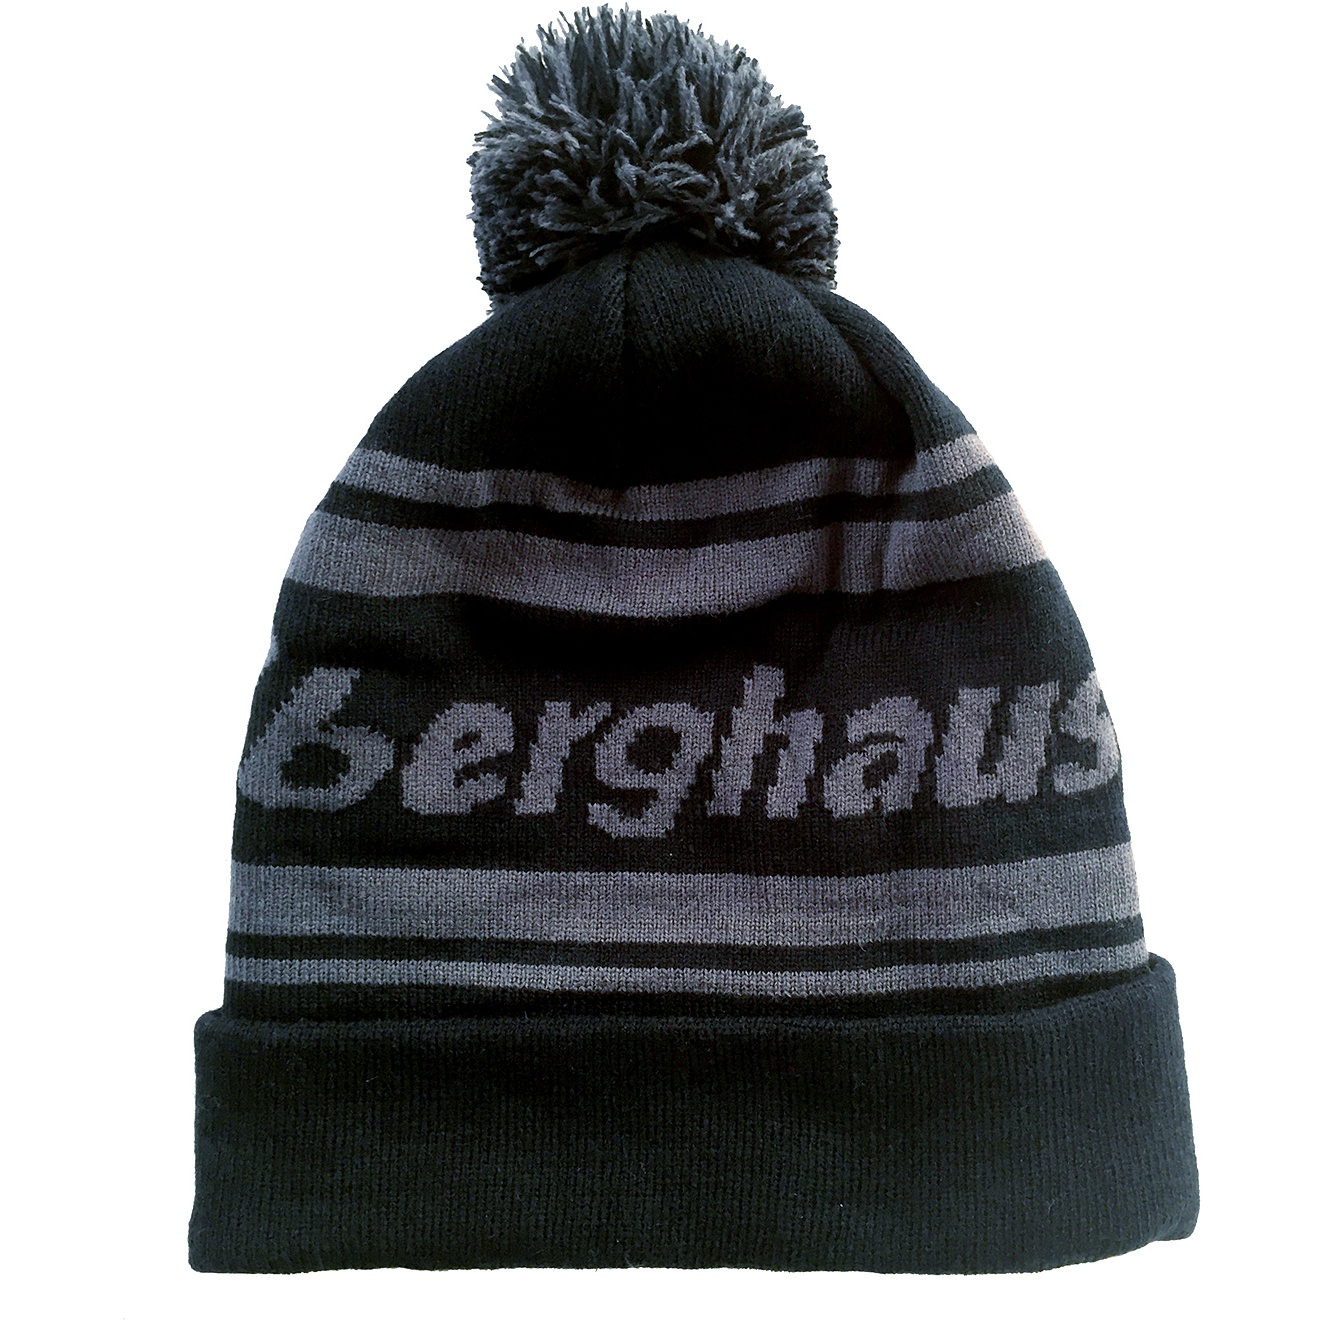 Picture of Berghaus Berg Beanie - Carbon/Black